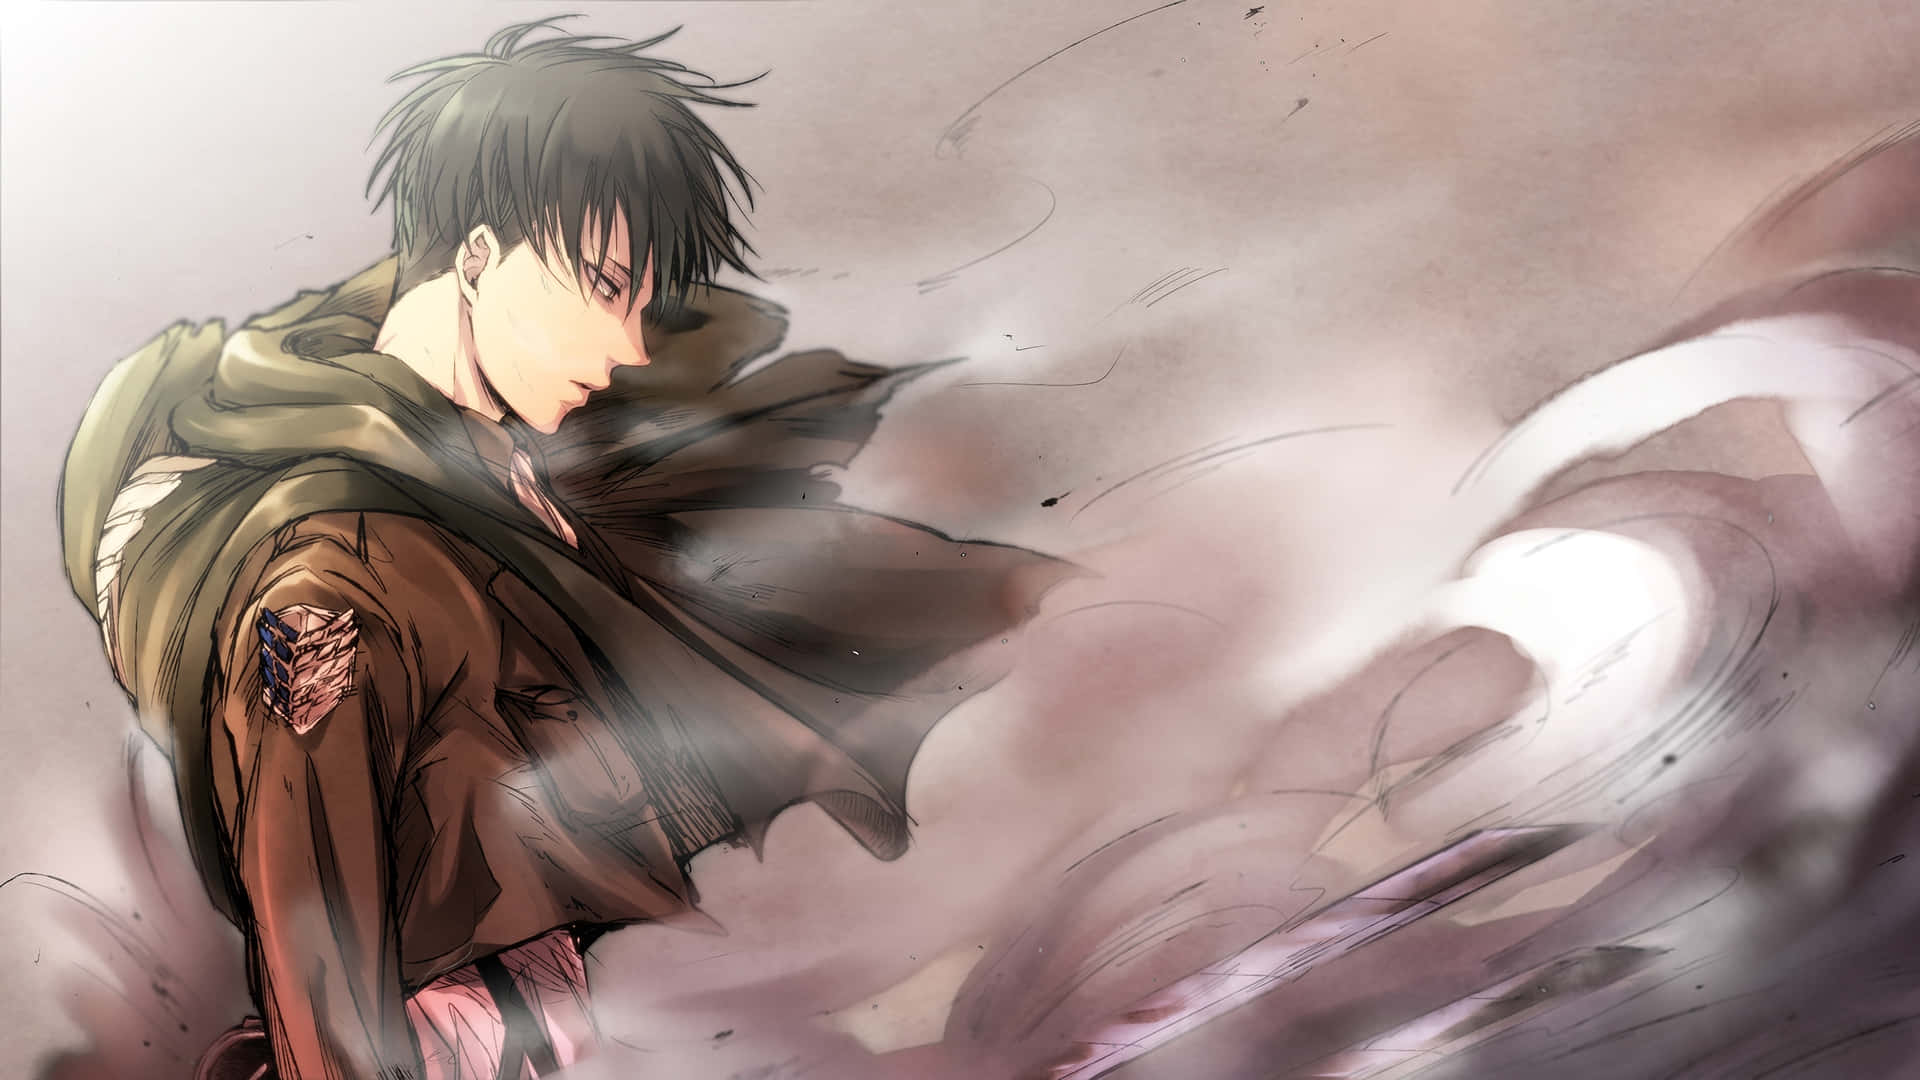 "Brave and Fearless - Levi from Attack on Titan" Wallpaper